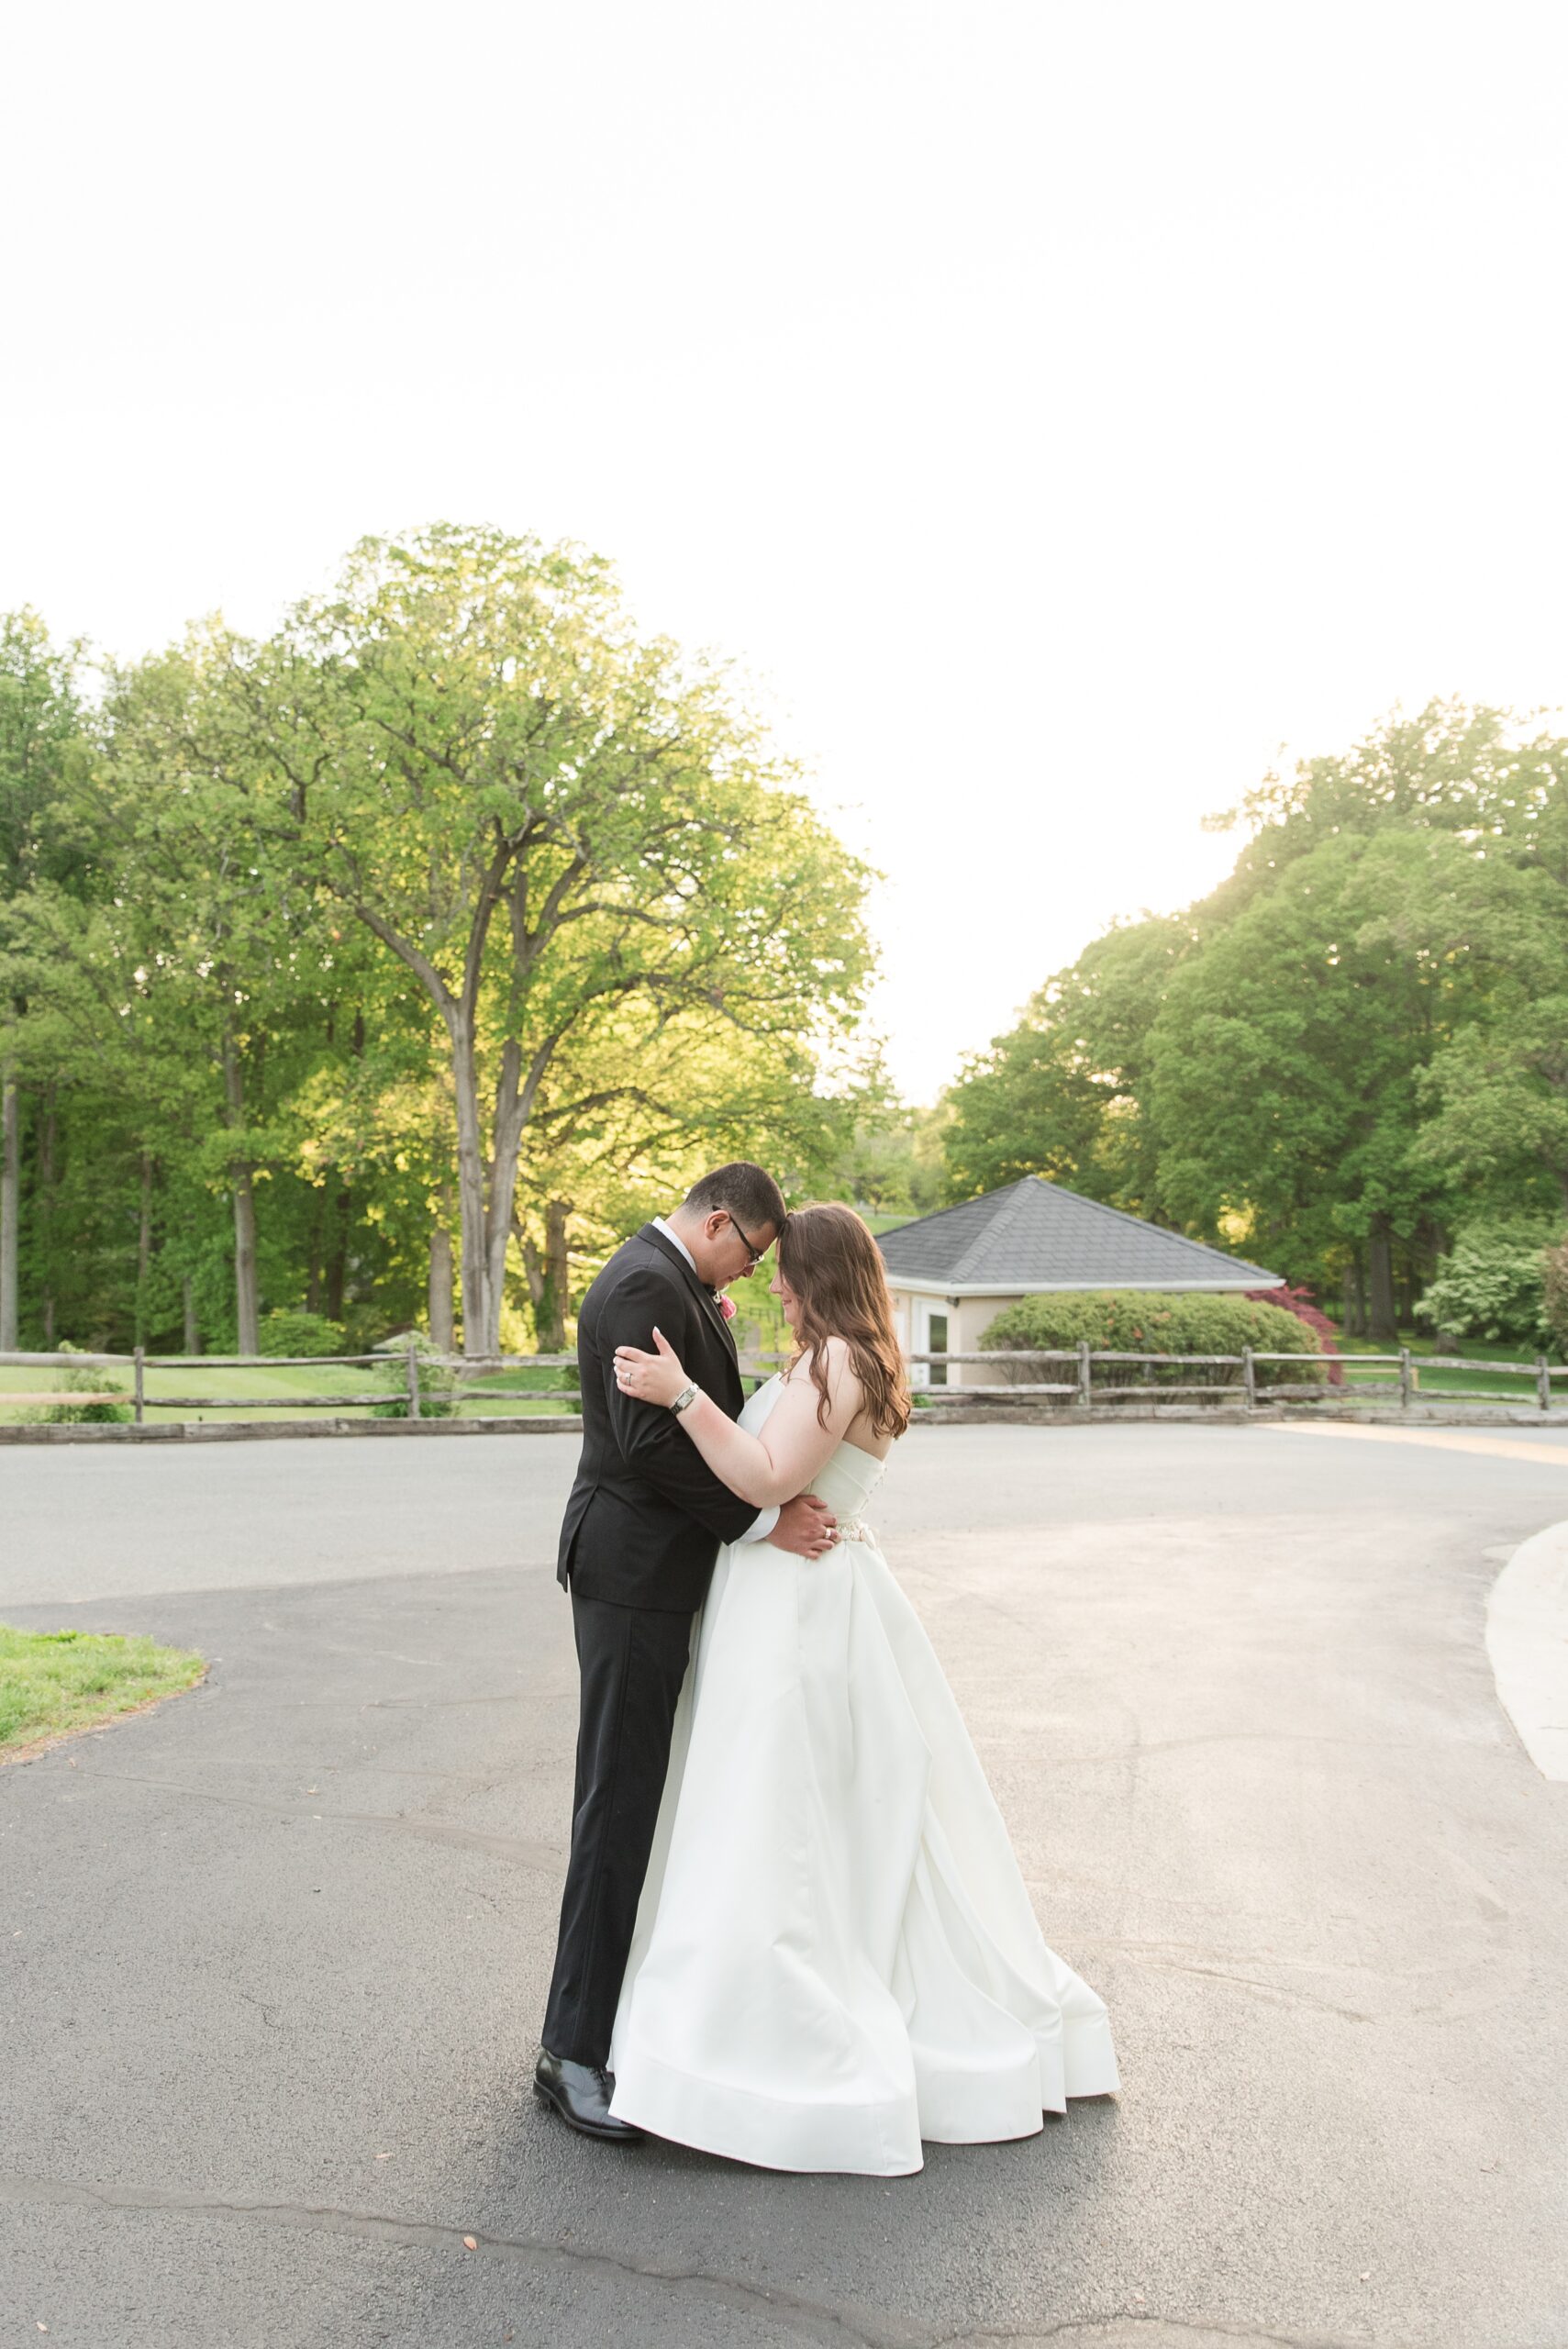 A bride and groom touch foreheads while standing in the driveway of the Manor Country Club Wedding venue at sunset